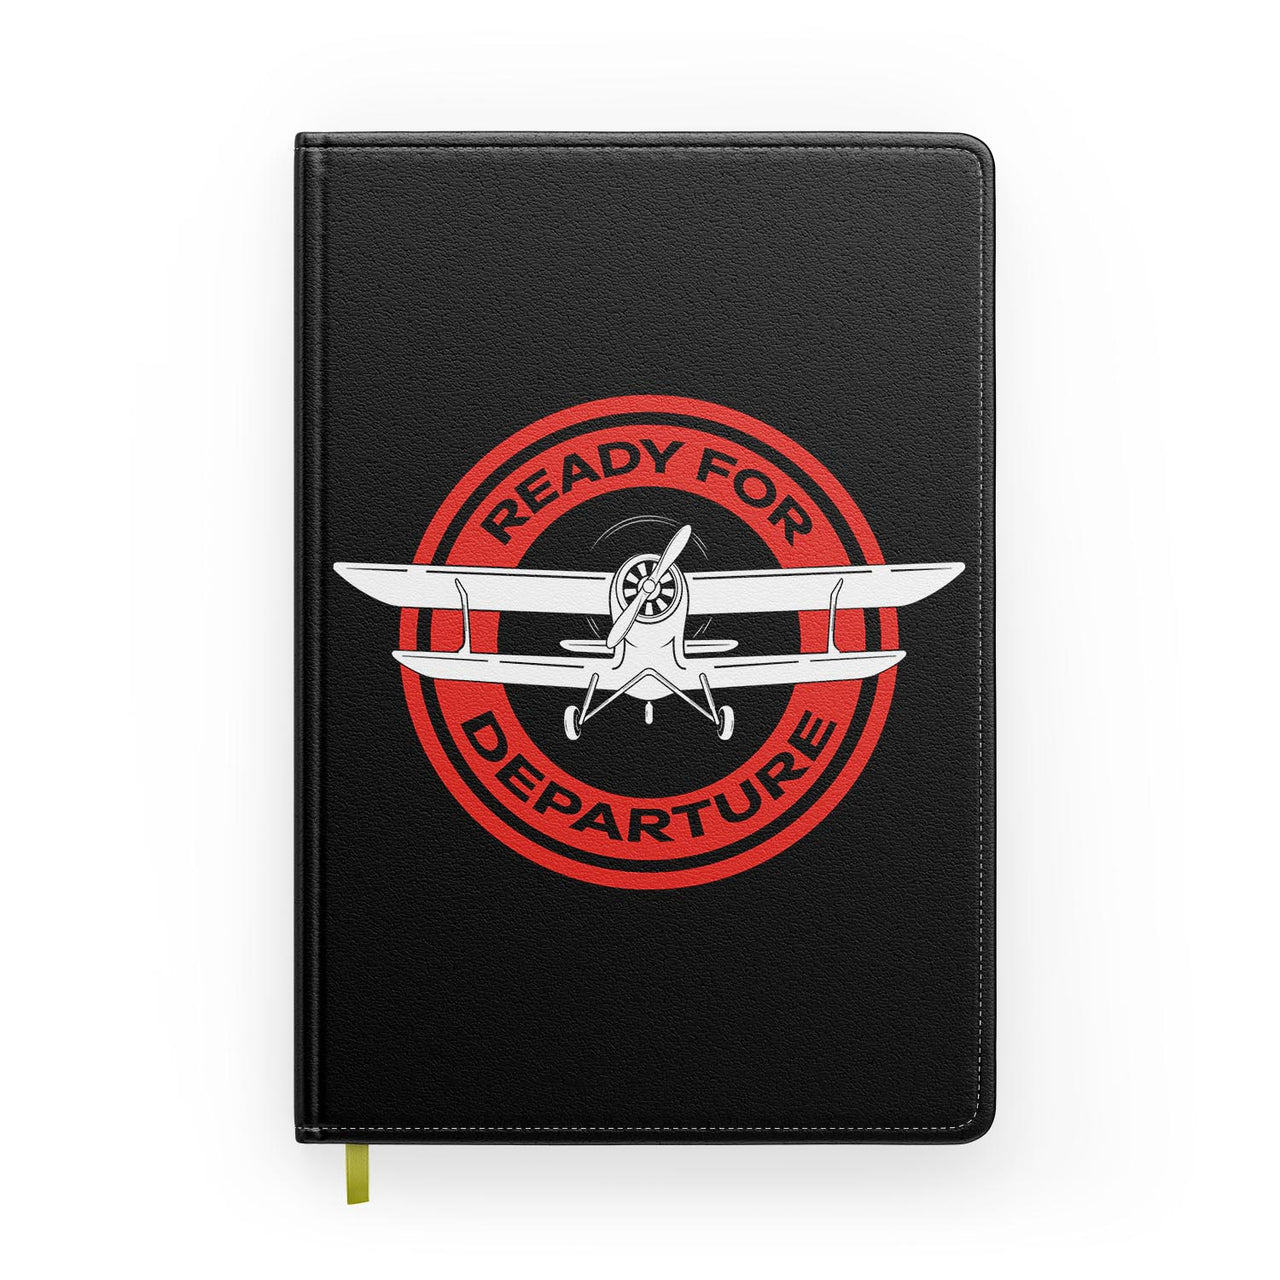 Ready for Departure Designed Notebooks